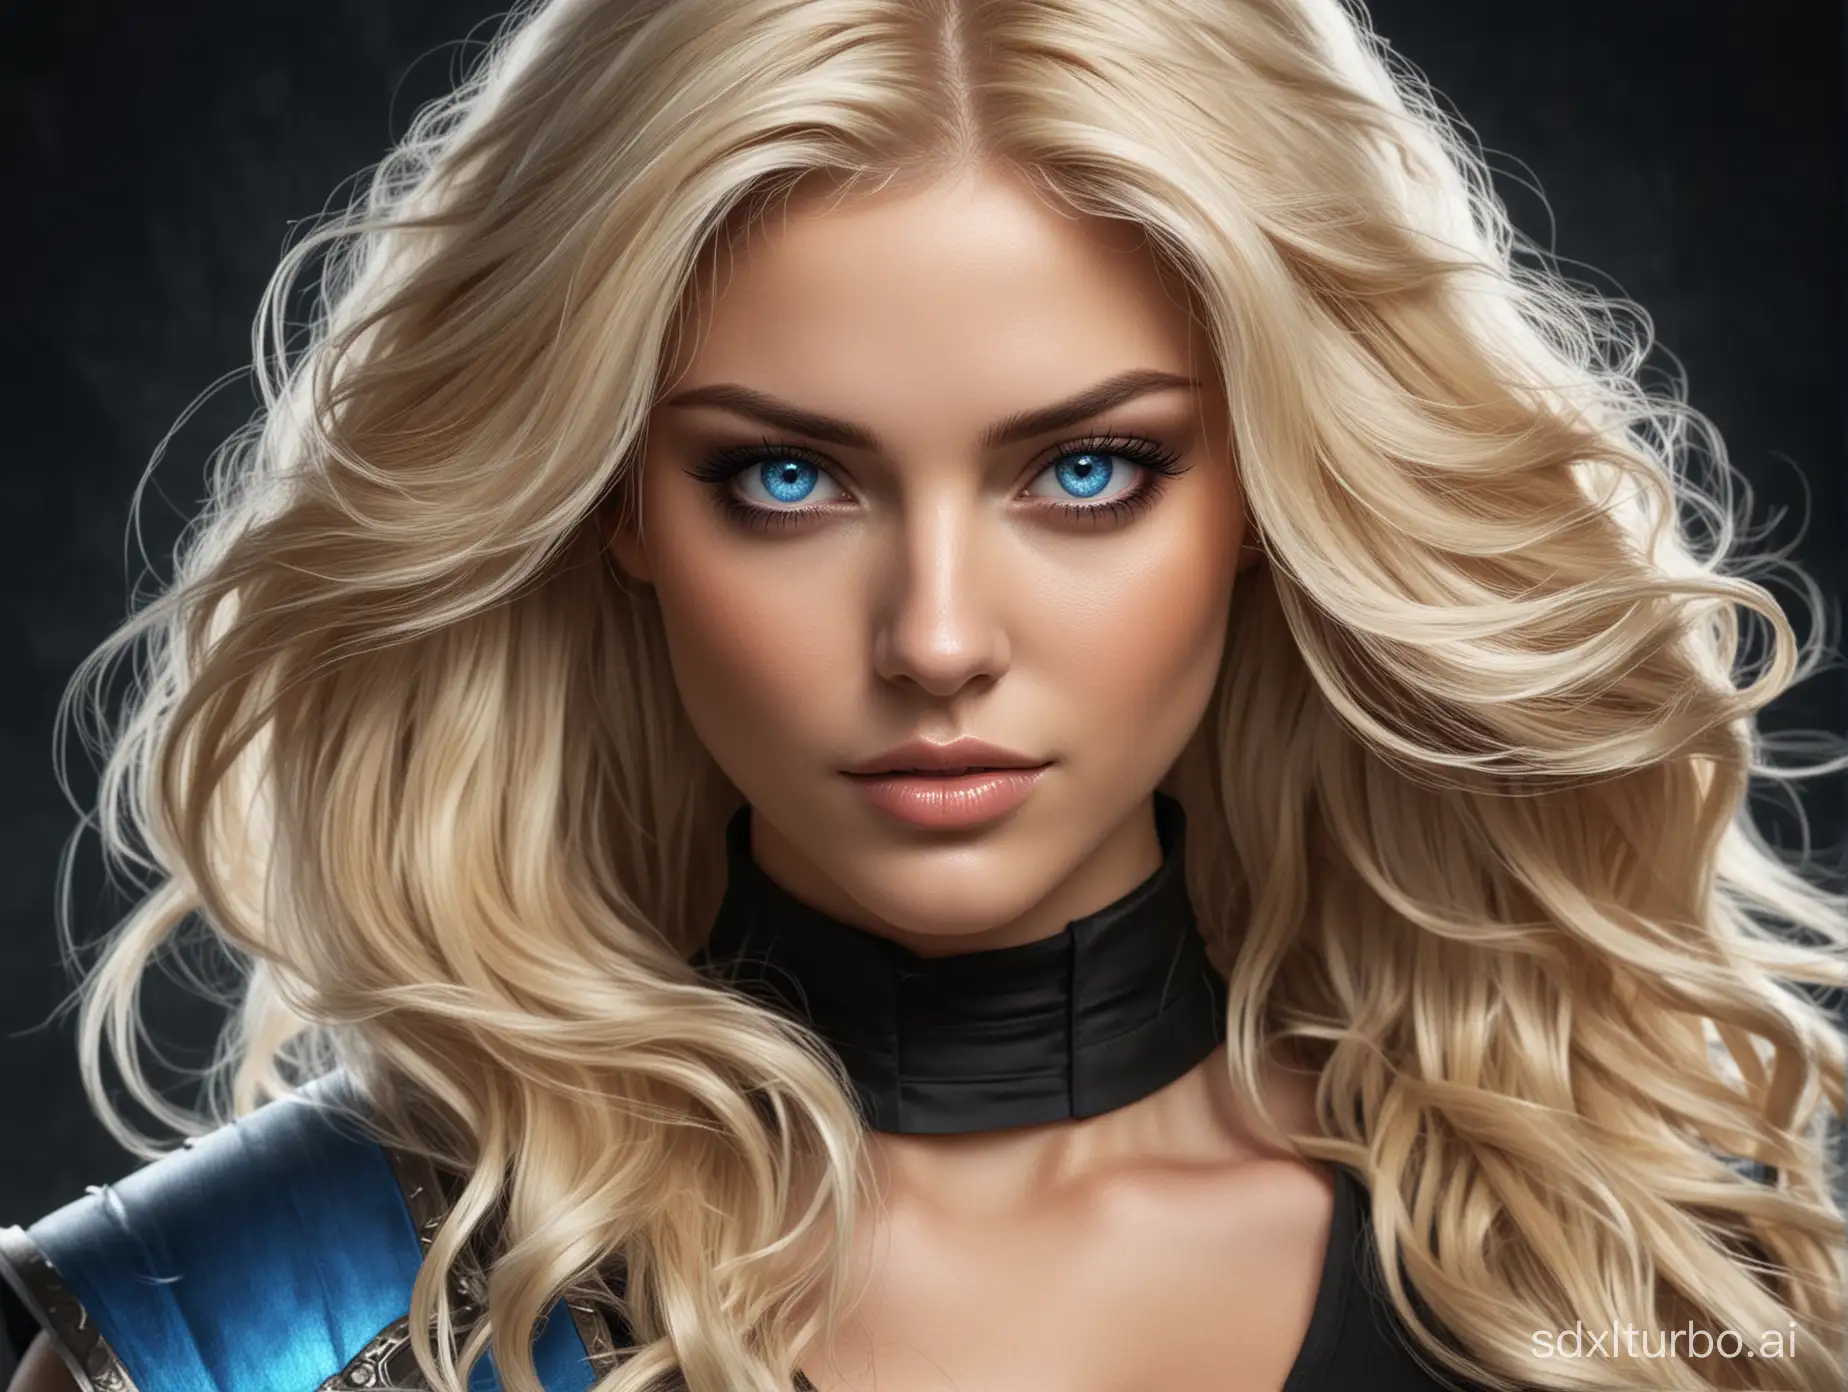 Blond with long wavy hair, blue eyes in the style of Mortal Kombat.